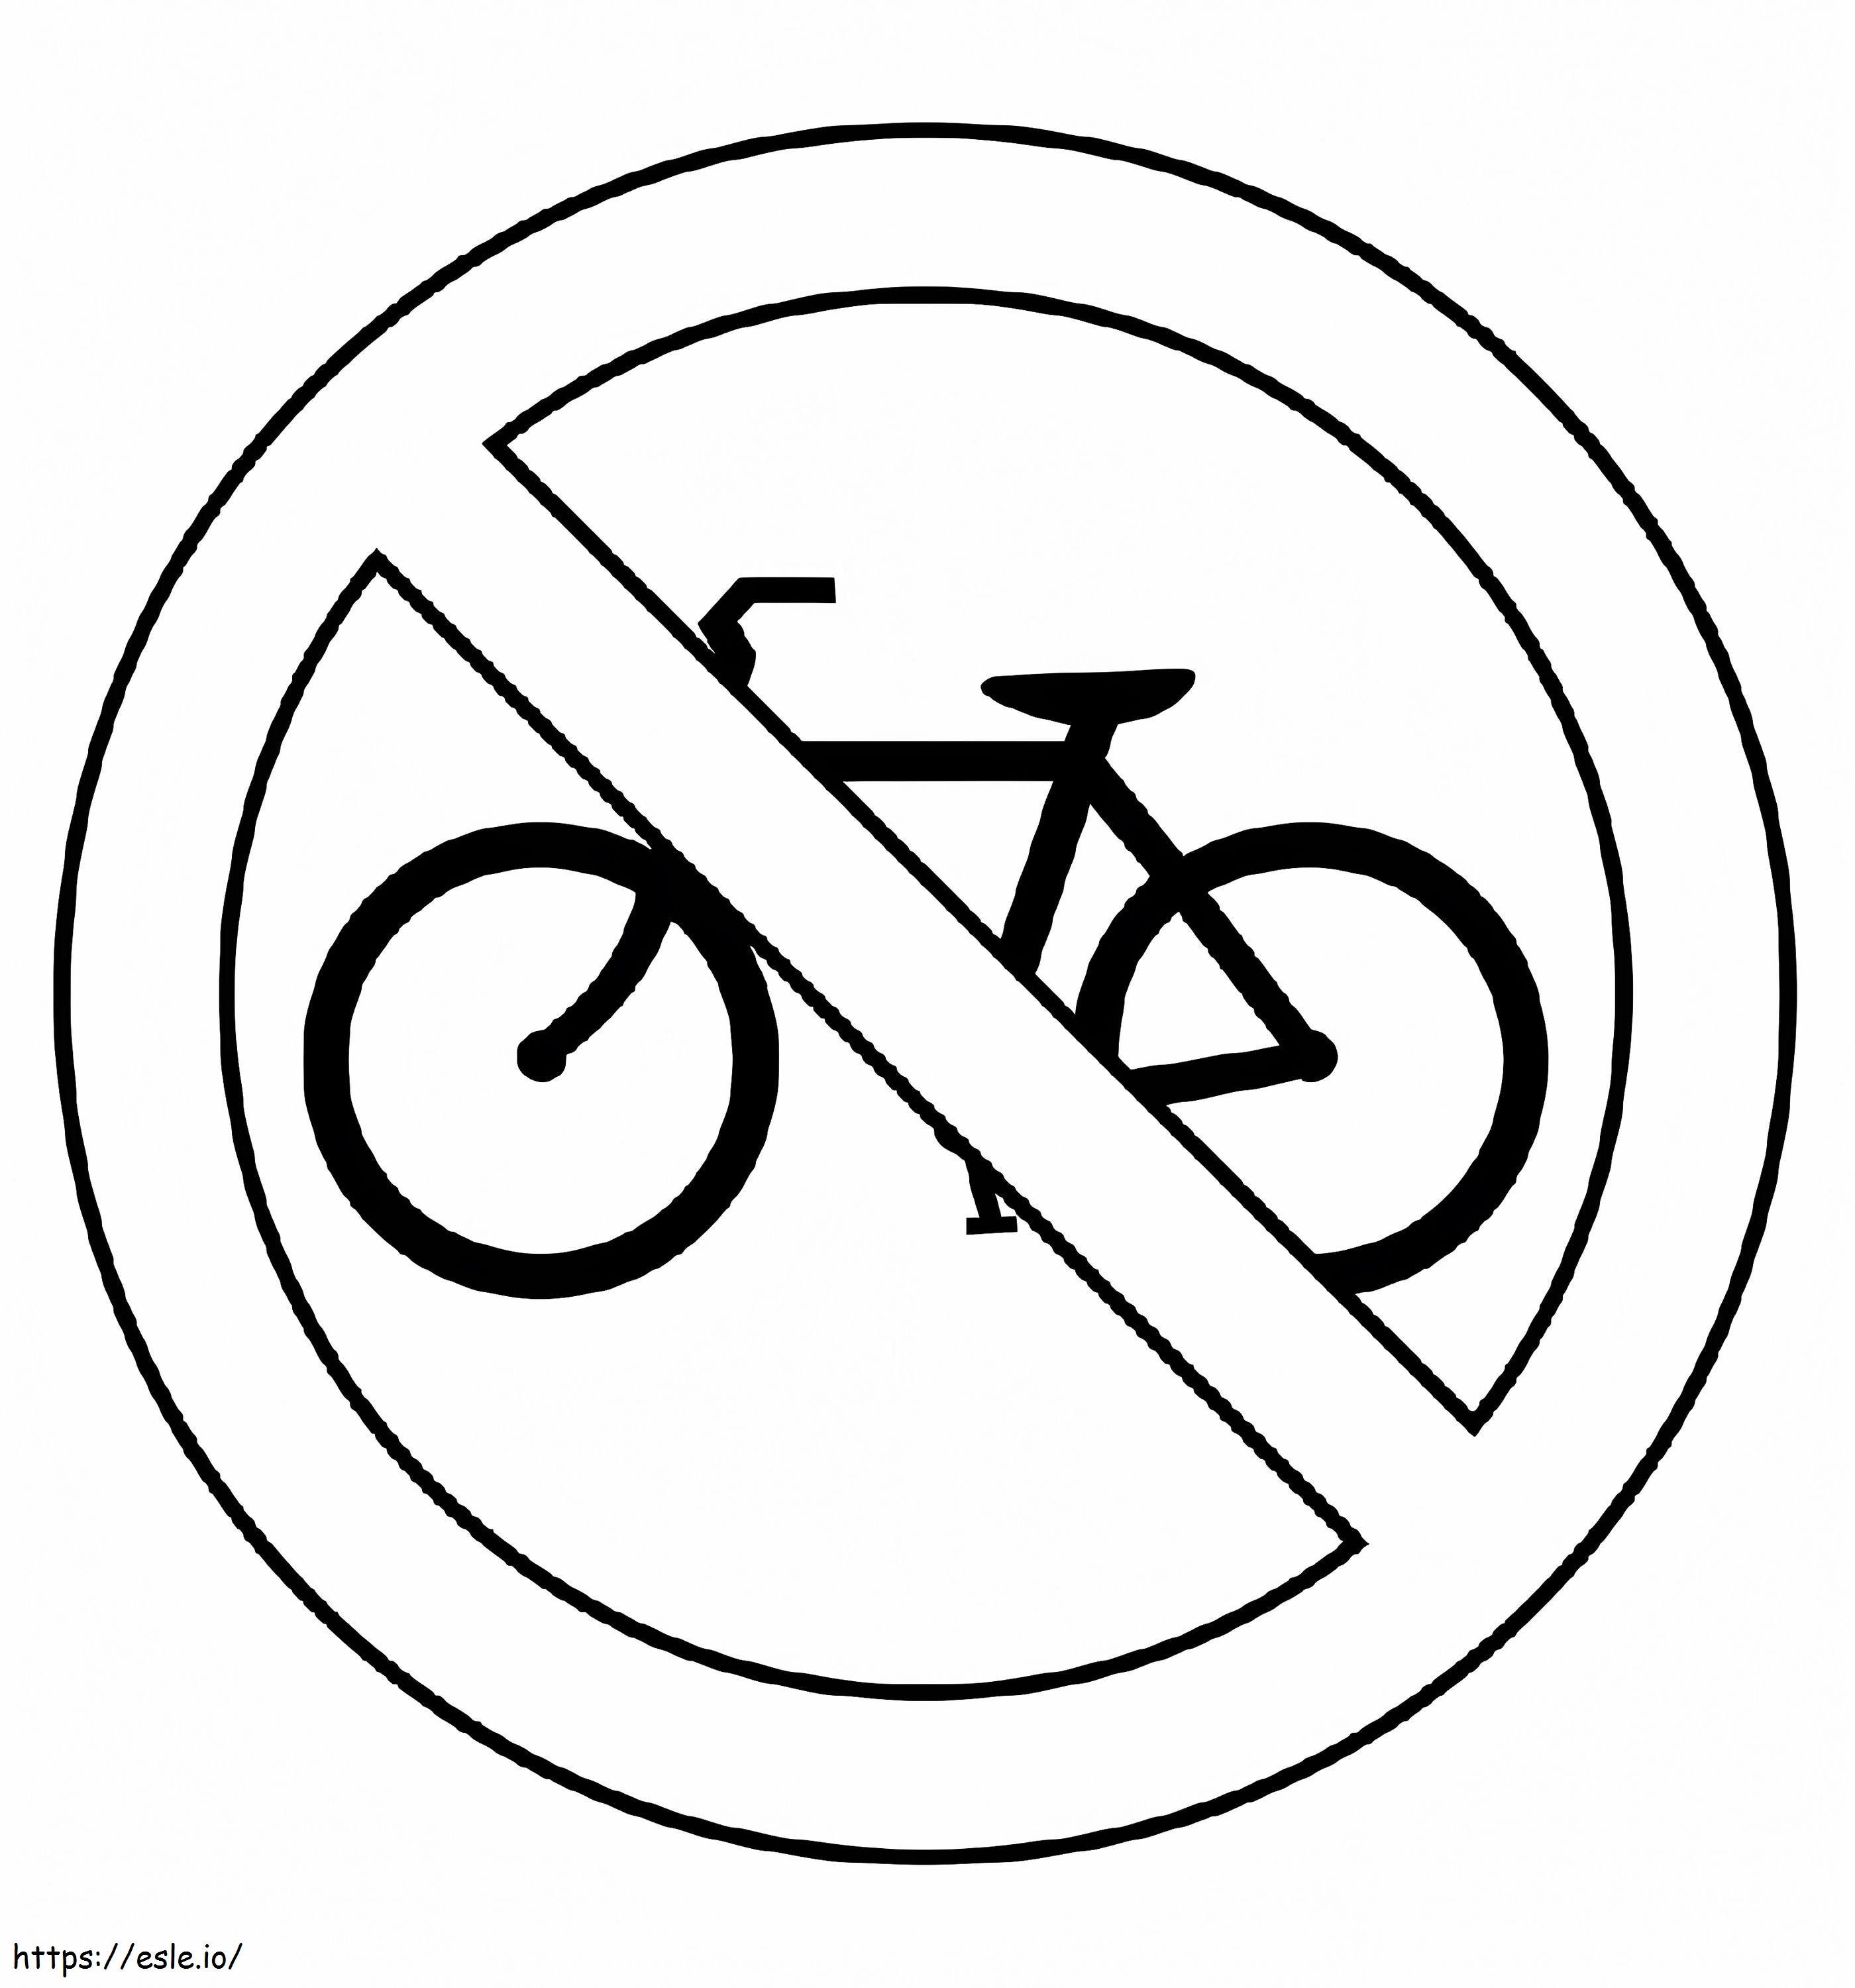 No Bike Traffic Sign coloring page